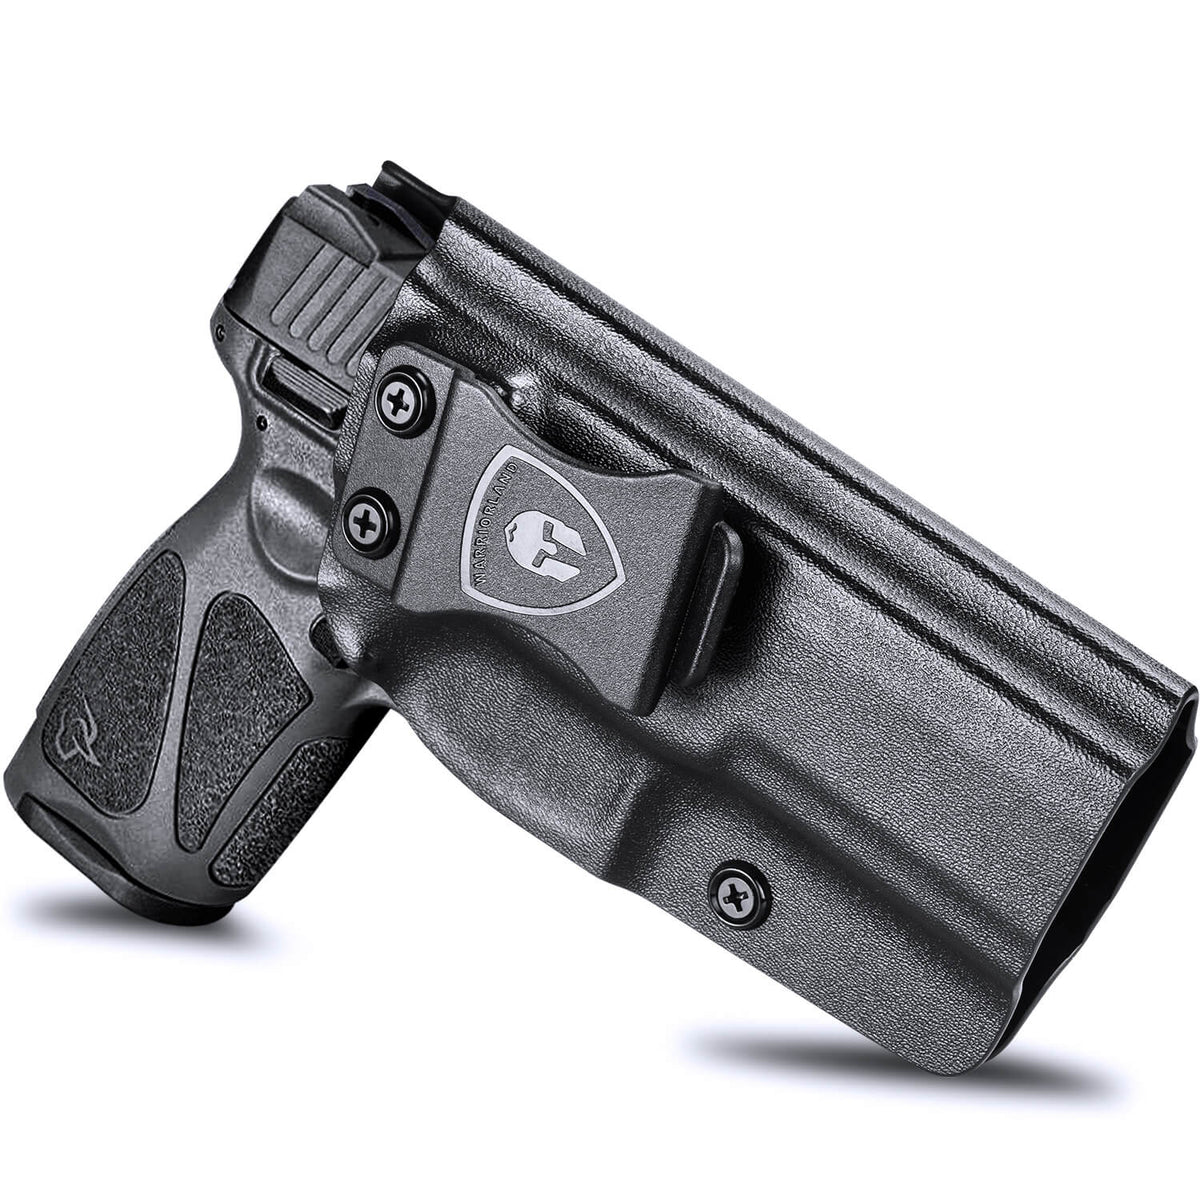 Taurus G3 IWB Kydex Holster Concealed Carry Right/ Left Handed | WARRIORLAND